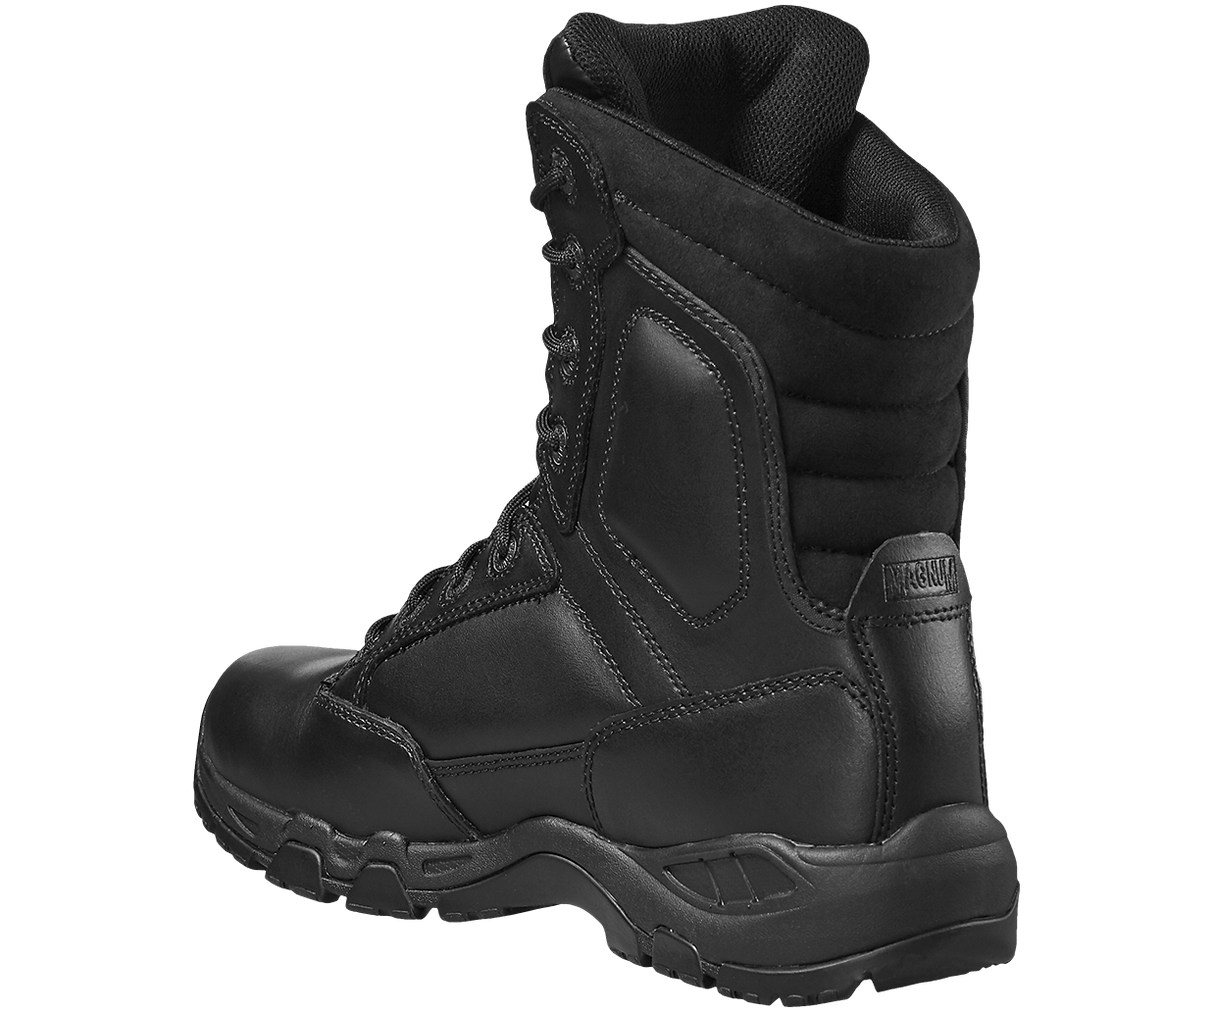 Magnum Viper Pro 8.0 Leather Waterproof Boots